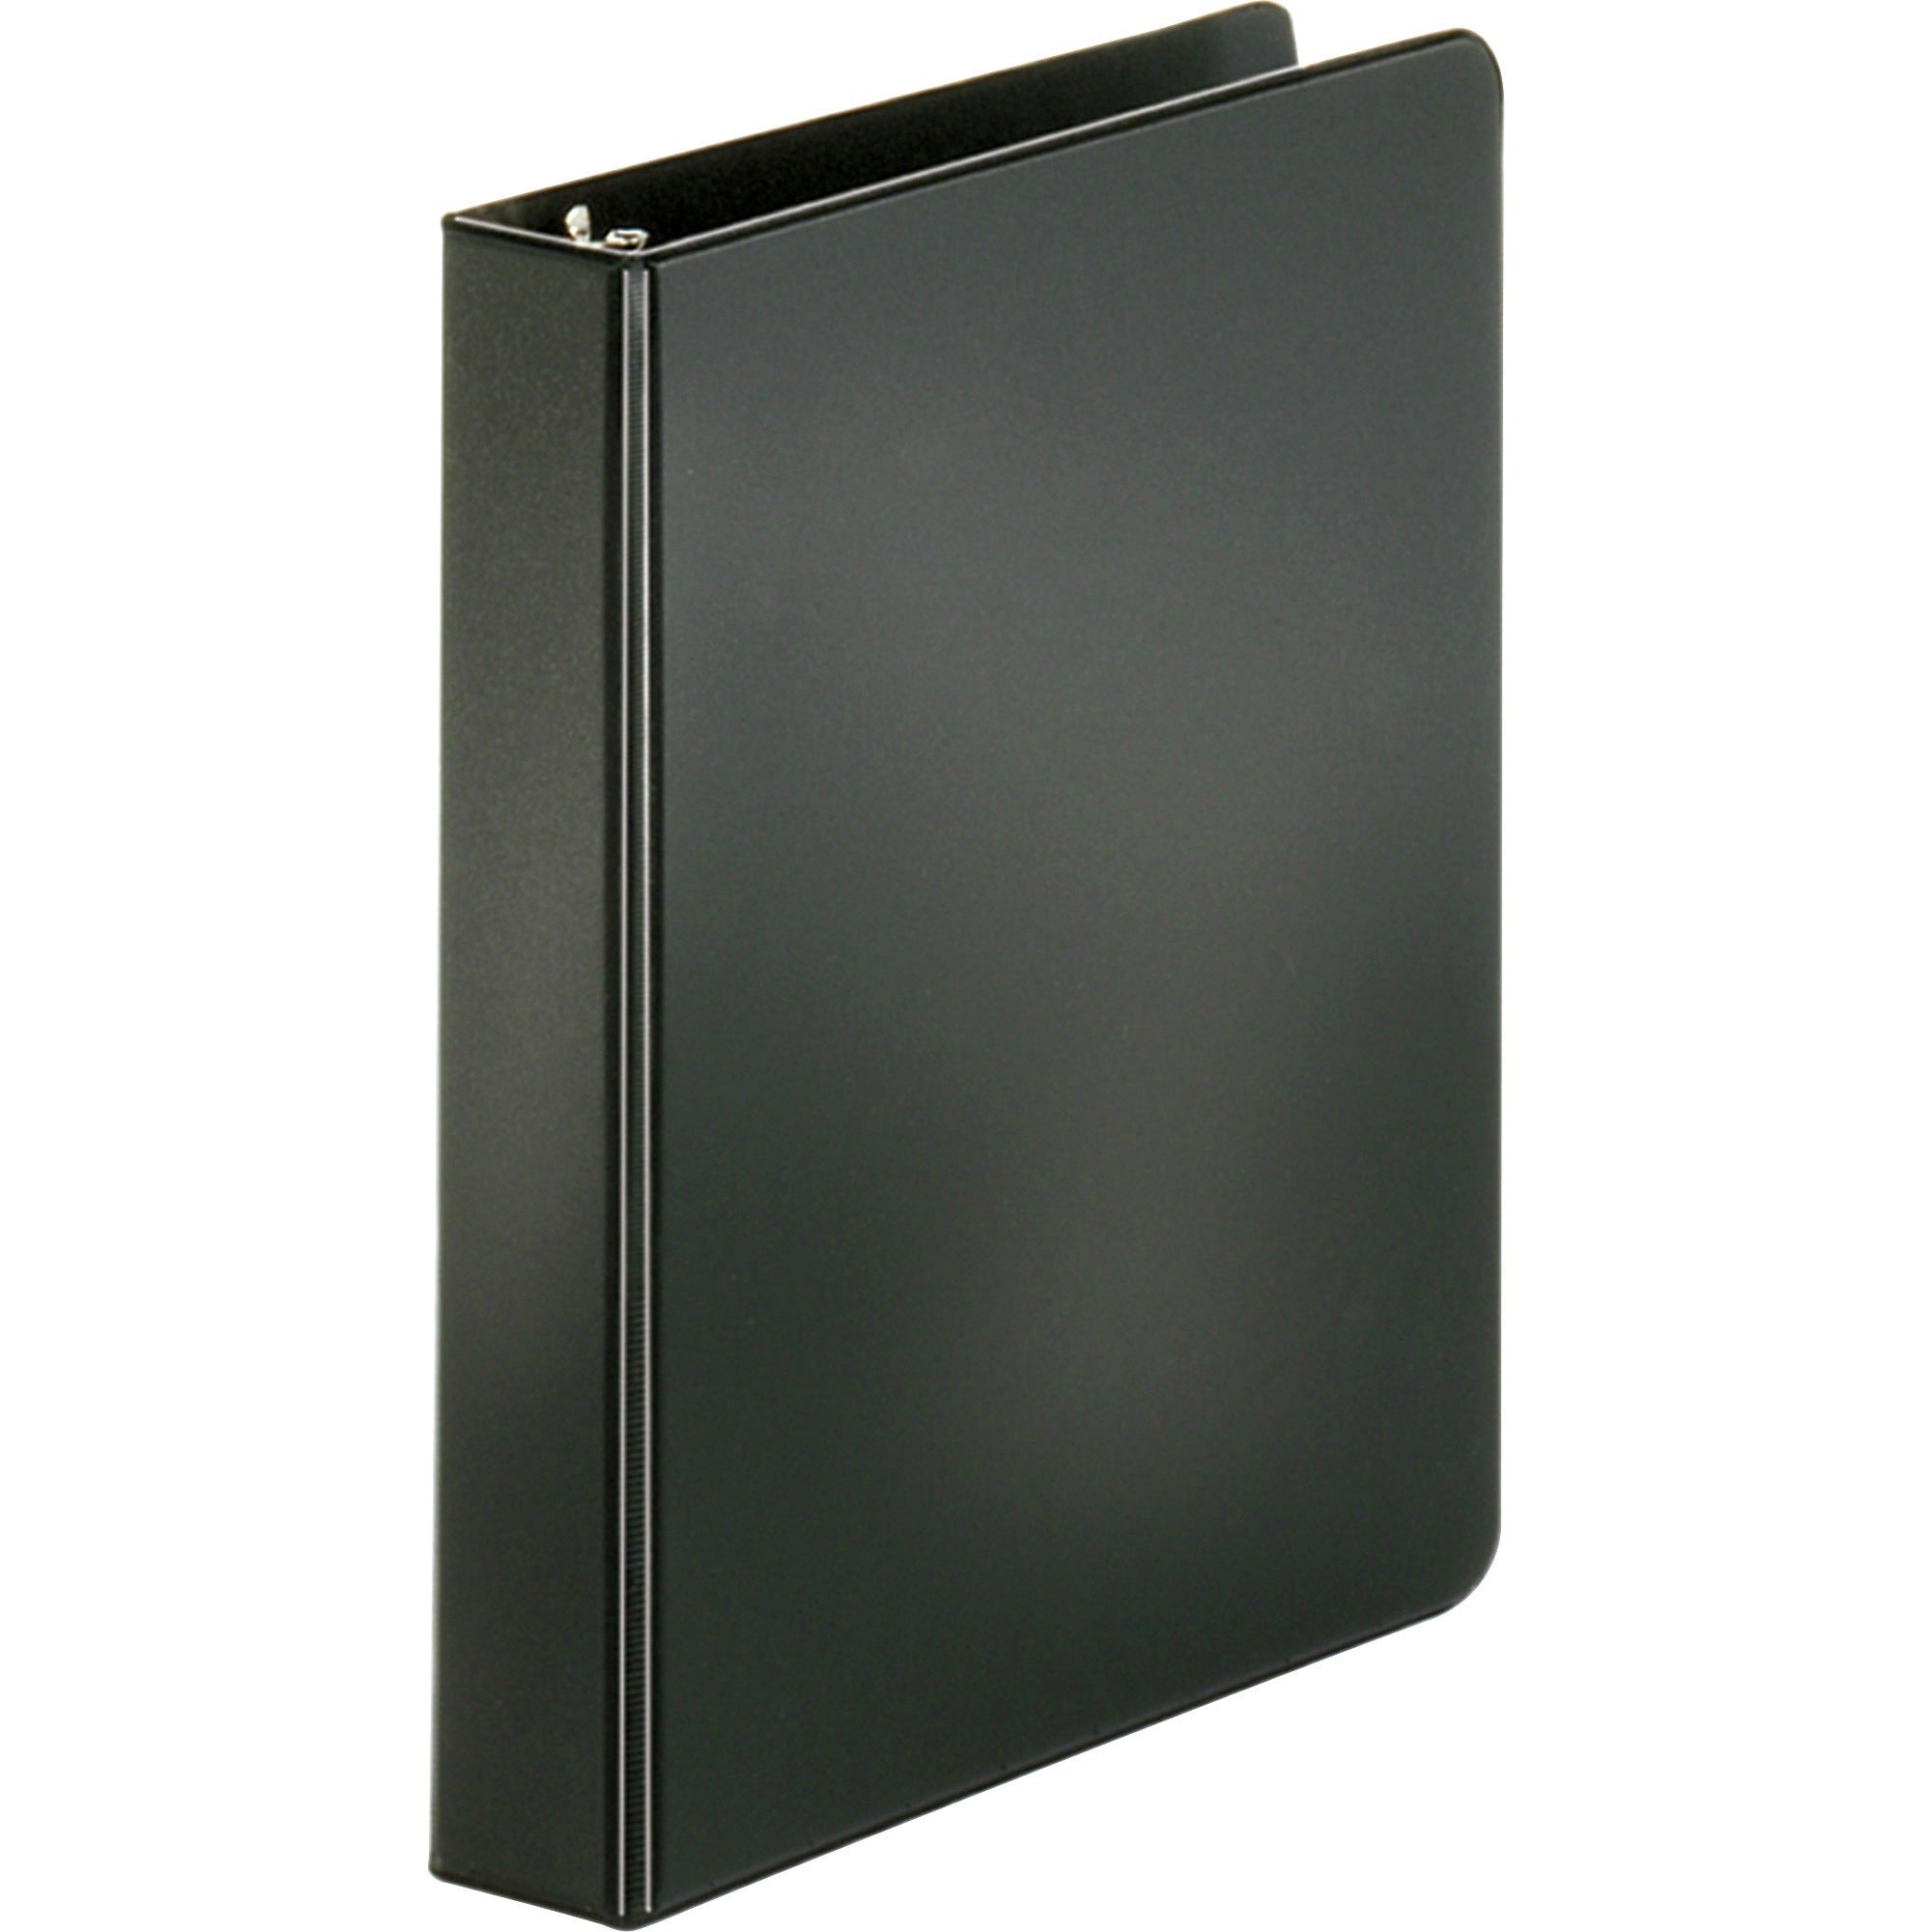 business-source-basic-round-ring-binders-1-binder-capacity-240-sheet-capacity-3-x-round-ring-fasteners-inside-front-&-back-pockets-chipboard-polypropylene-black-exposed-rivet-sturdy-open-and-closed-triggers-4-bundle_bsn28523bd - 2